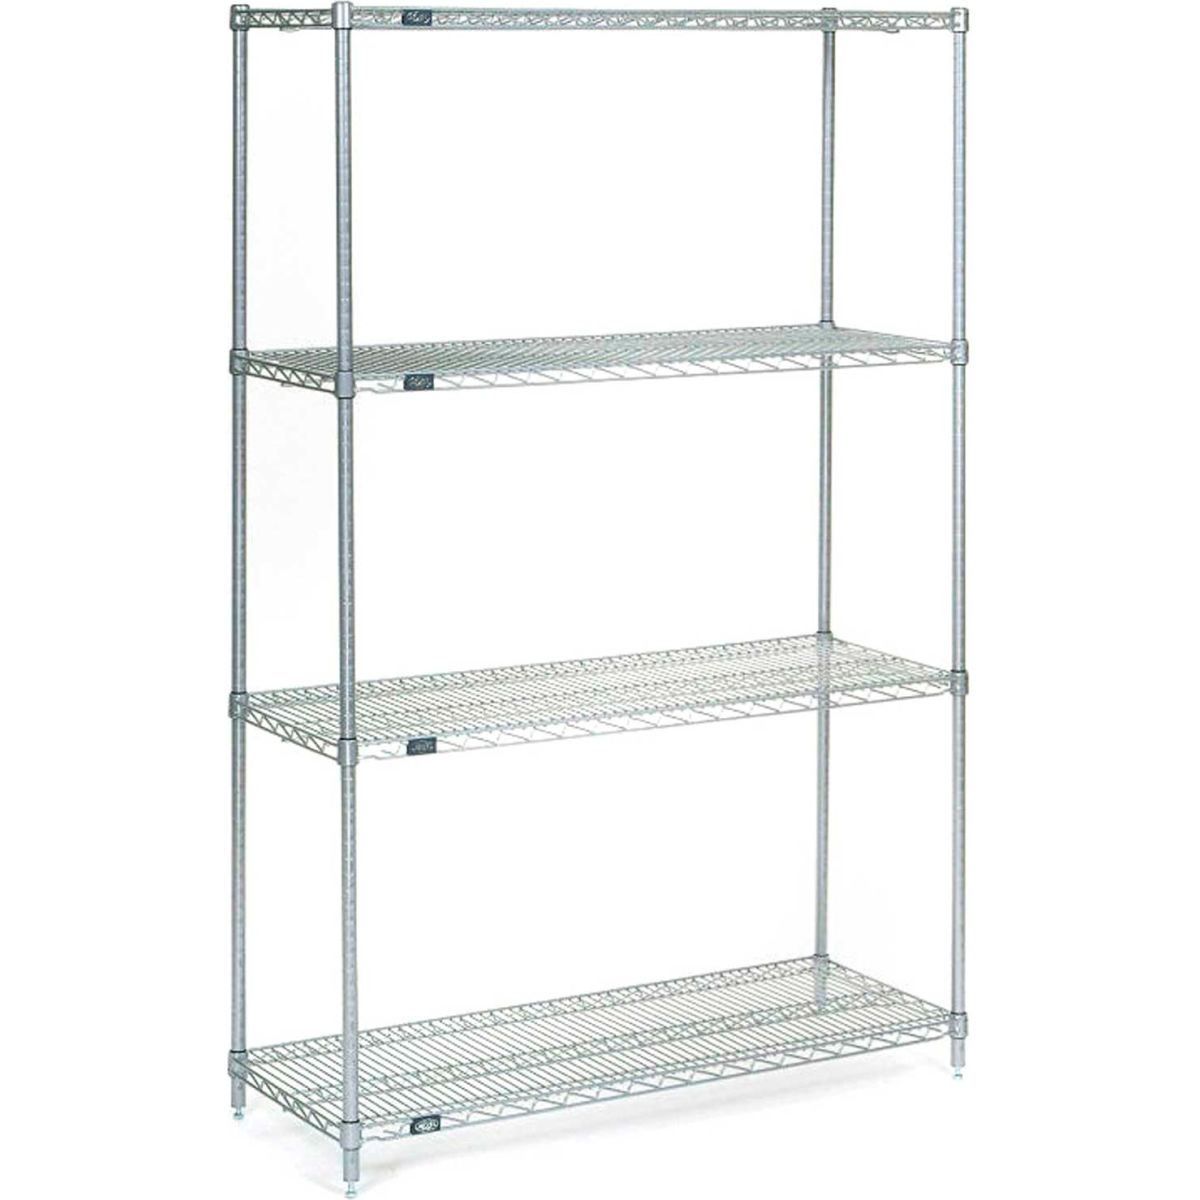 Picture of Global Industrial 14487S5 74 x 48 x 14 in. Nexel Stainless Steel Starter 5 Tier Wire Shelving